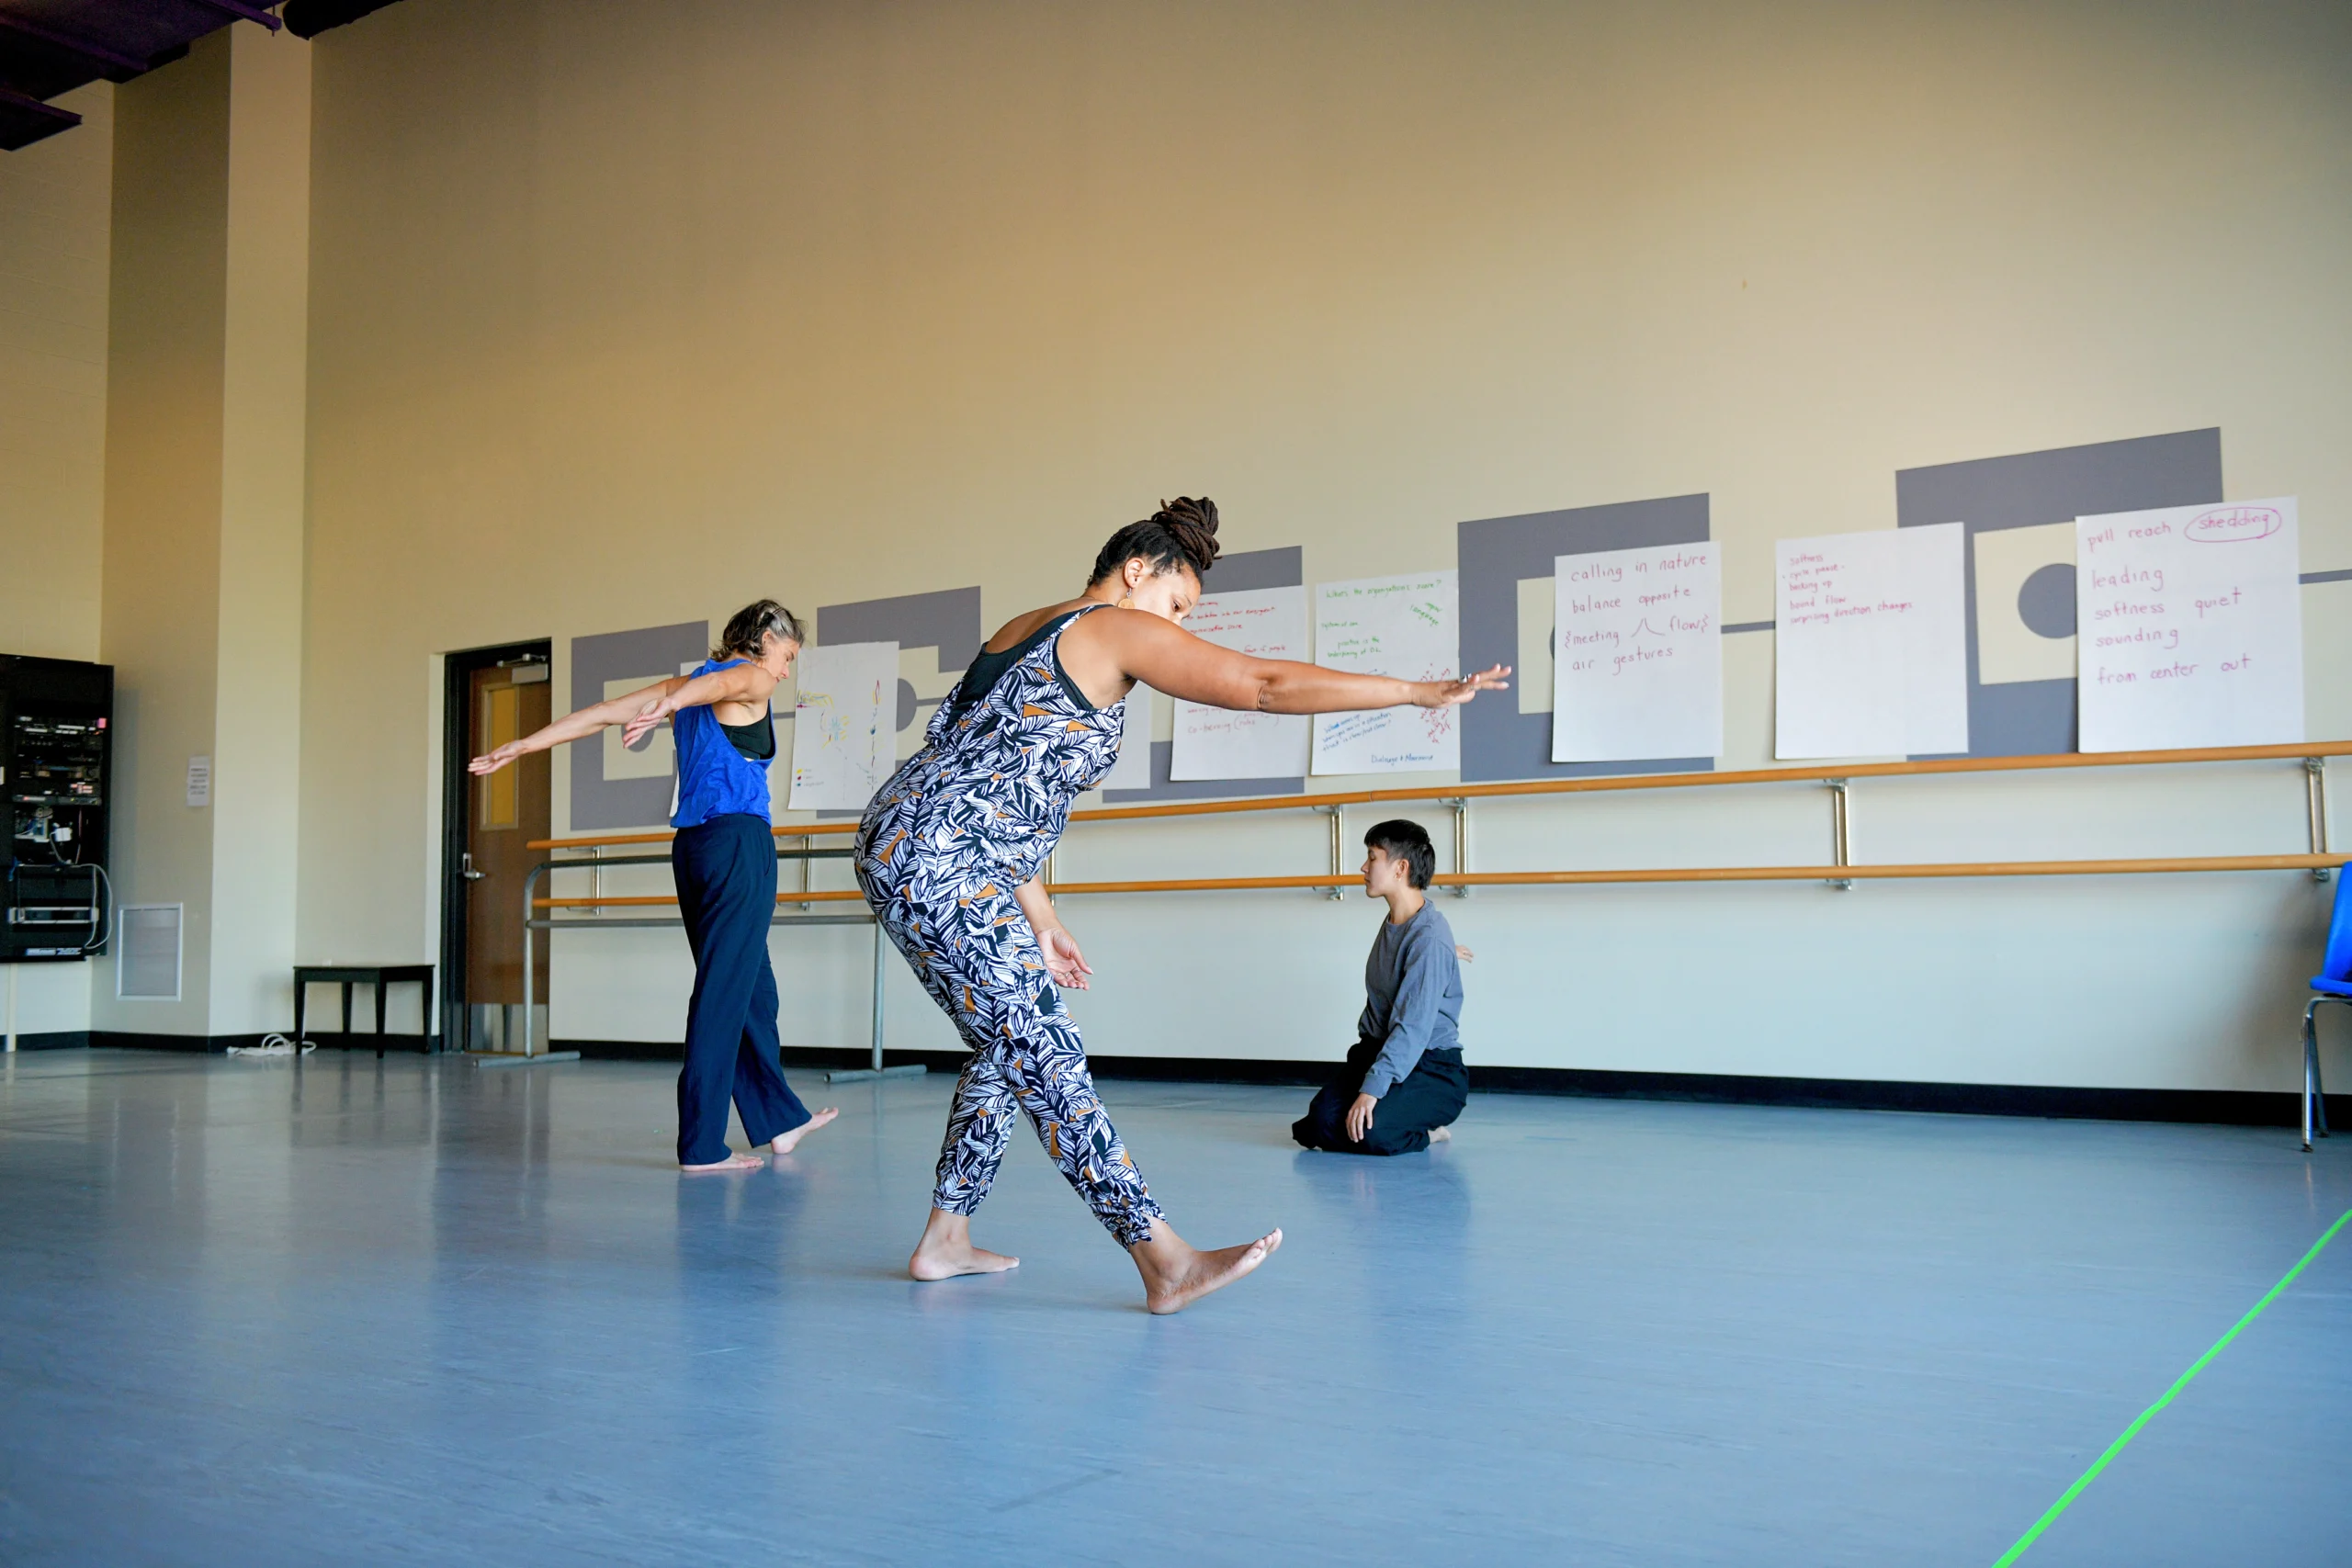 Three dance artists move independently in a studio. One kneels, another swings their arms behind them as they step forward, and a third extends a heel and hand forward, creating straight lines and angles. All are barefoot and wearing warm rehearsal clothes.